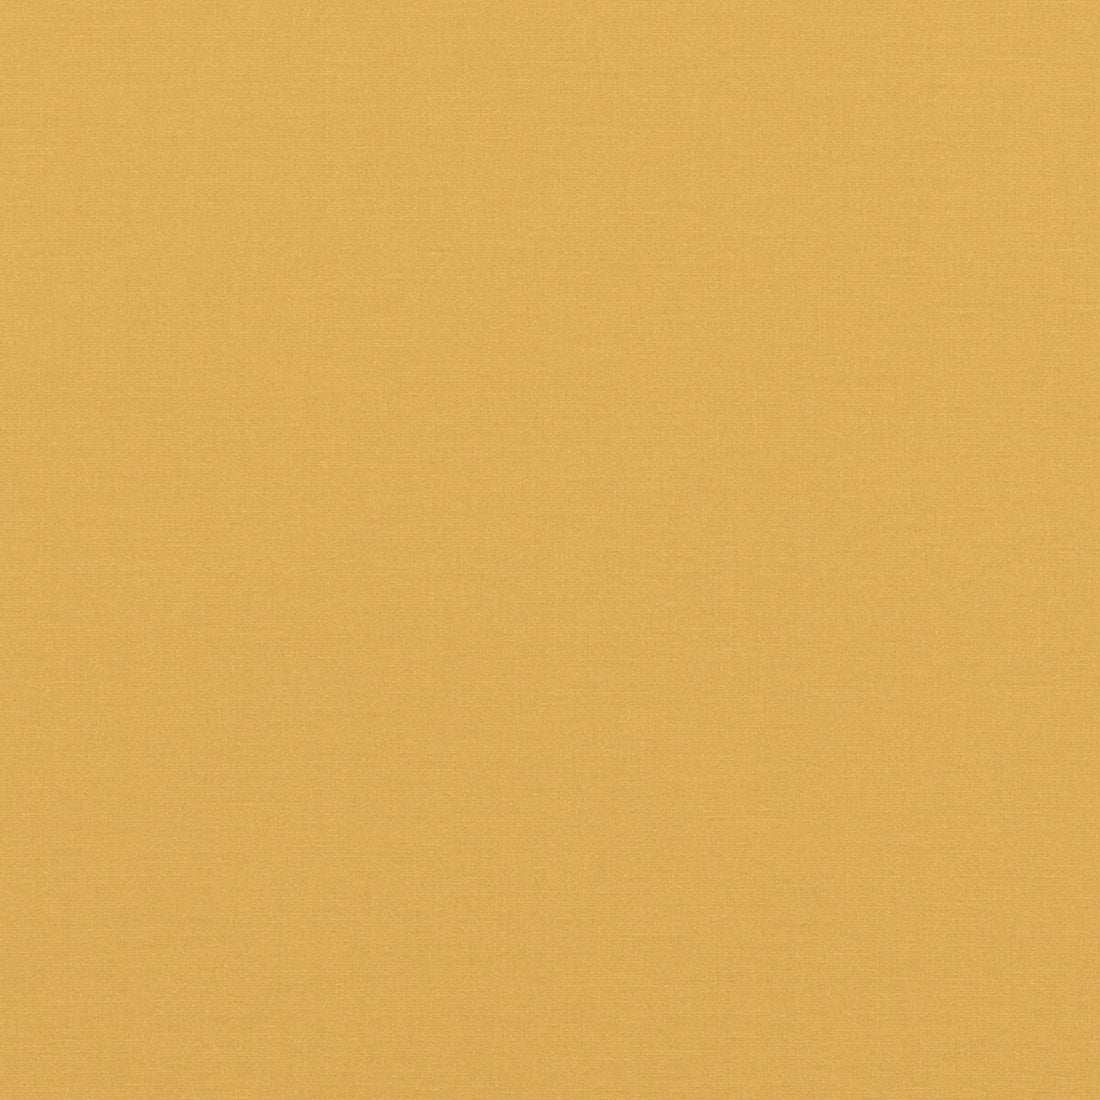 Pavilion fabric in ochre color - pattern PF50478.840.0 - by Baker Lifestyle in the Pavilion - Blegrave Notebook collection